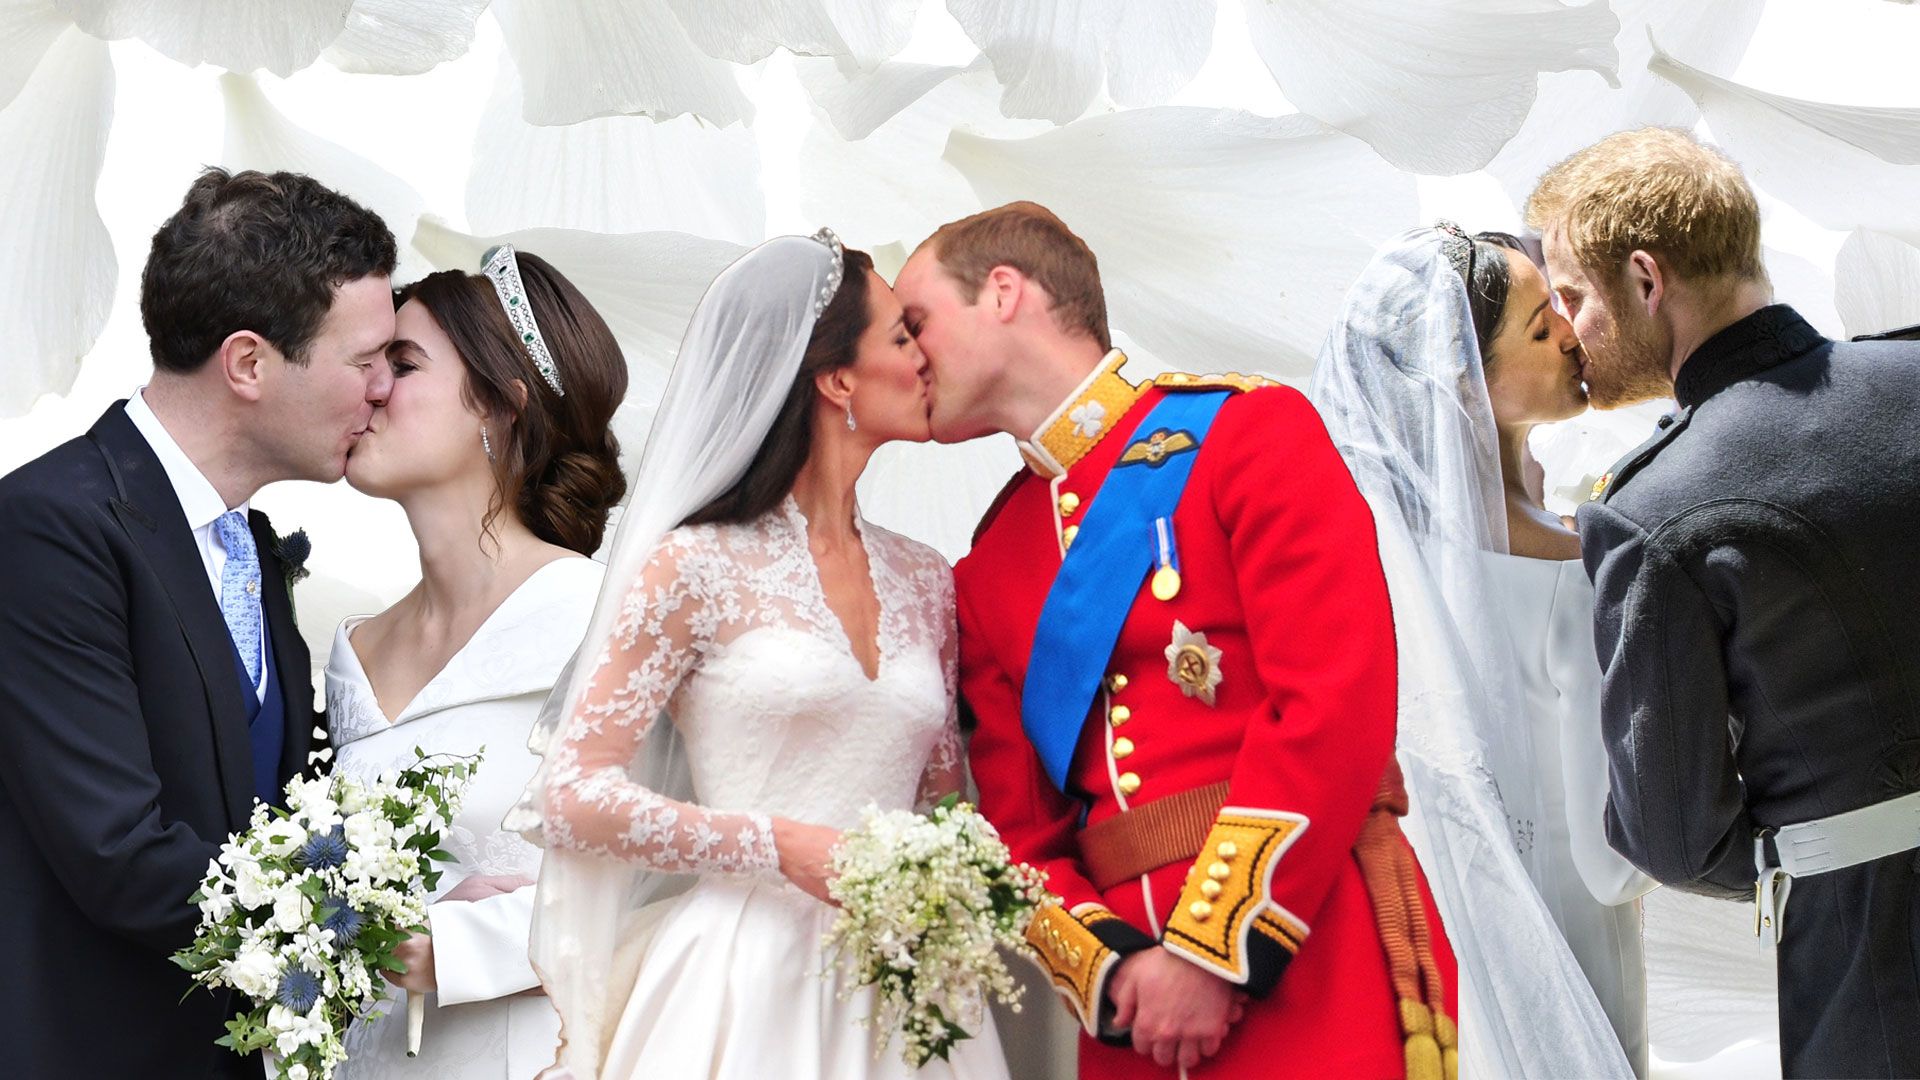 eugenie and jack brooksbank, princess kate and prince william, meghan markle and prince harry kissing on wedding day